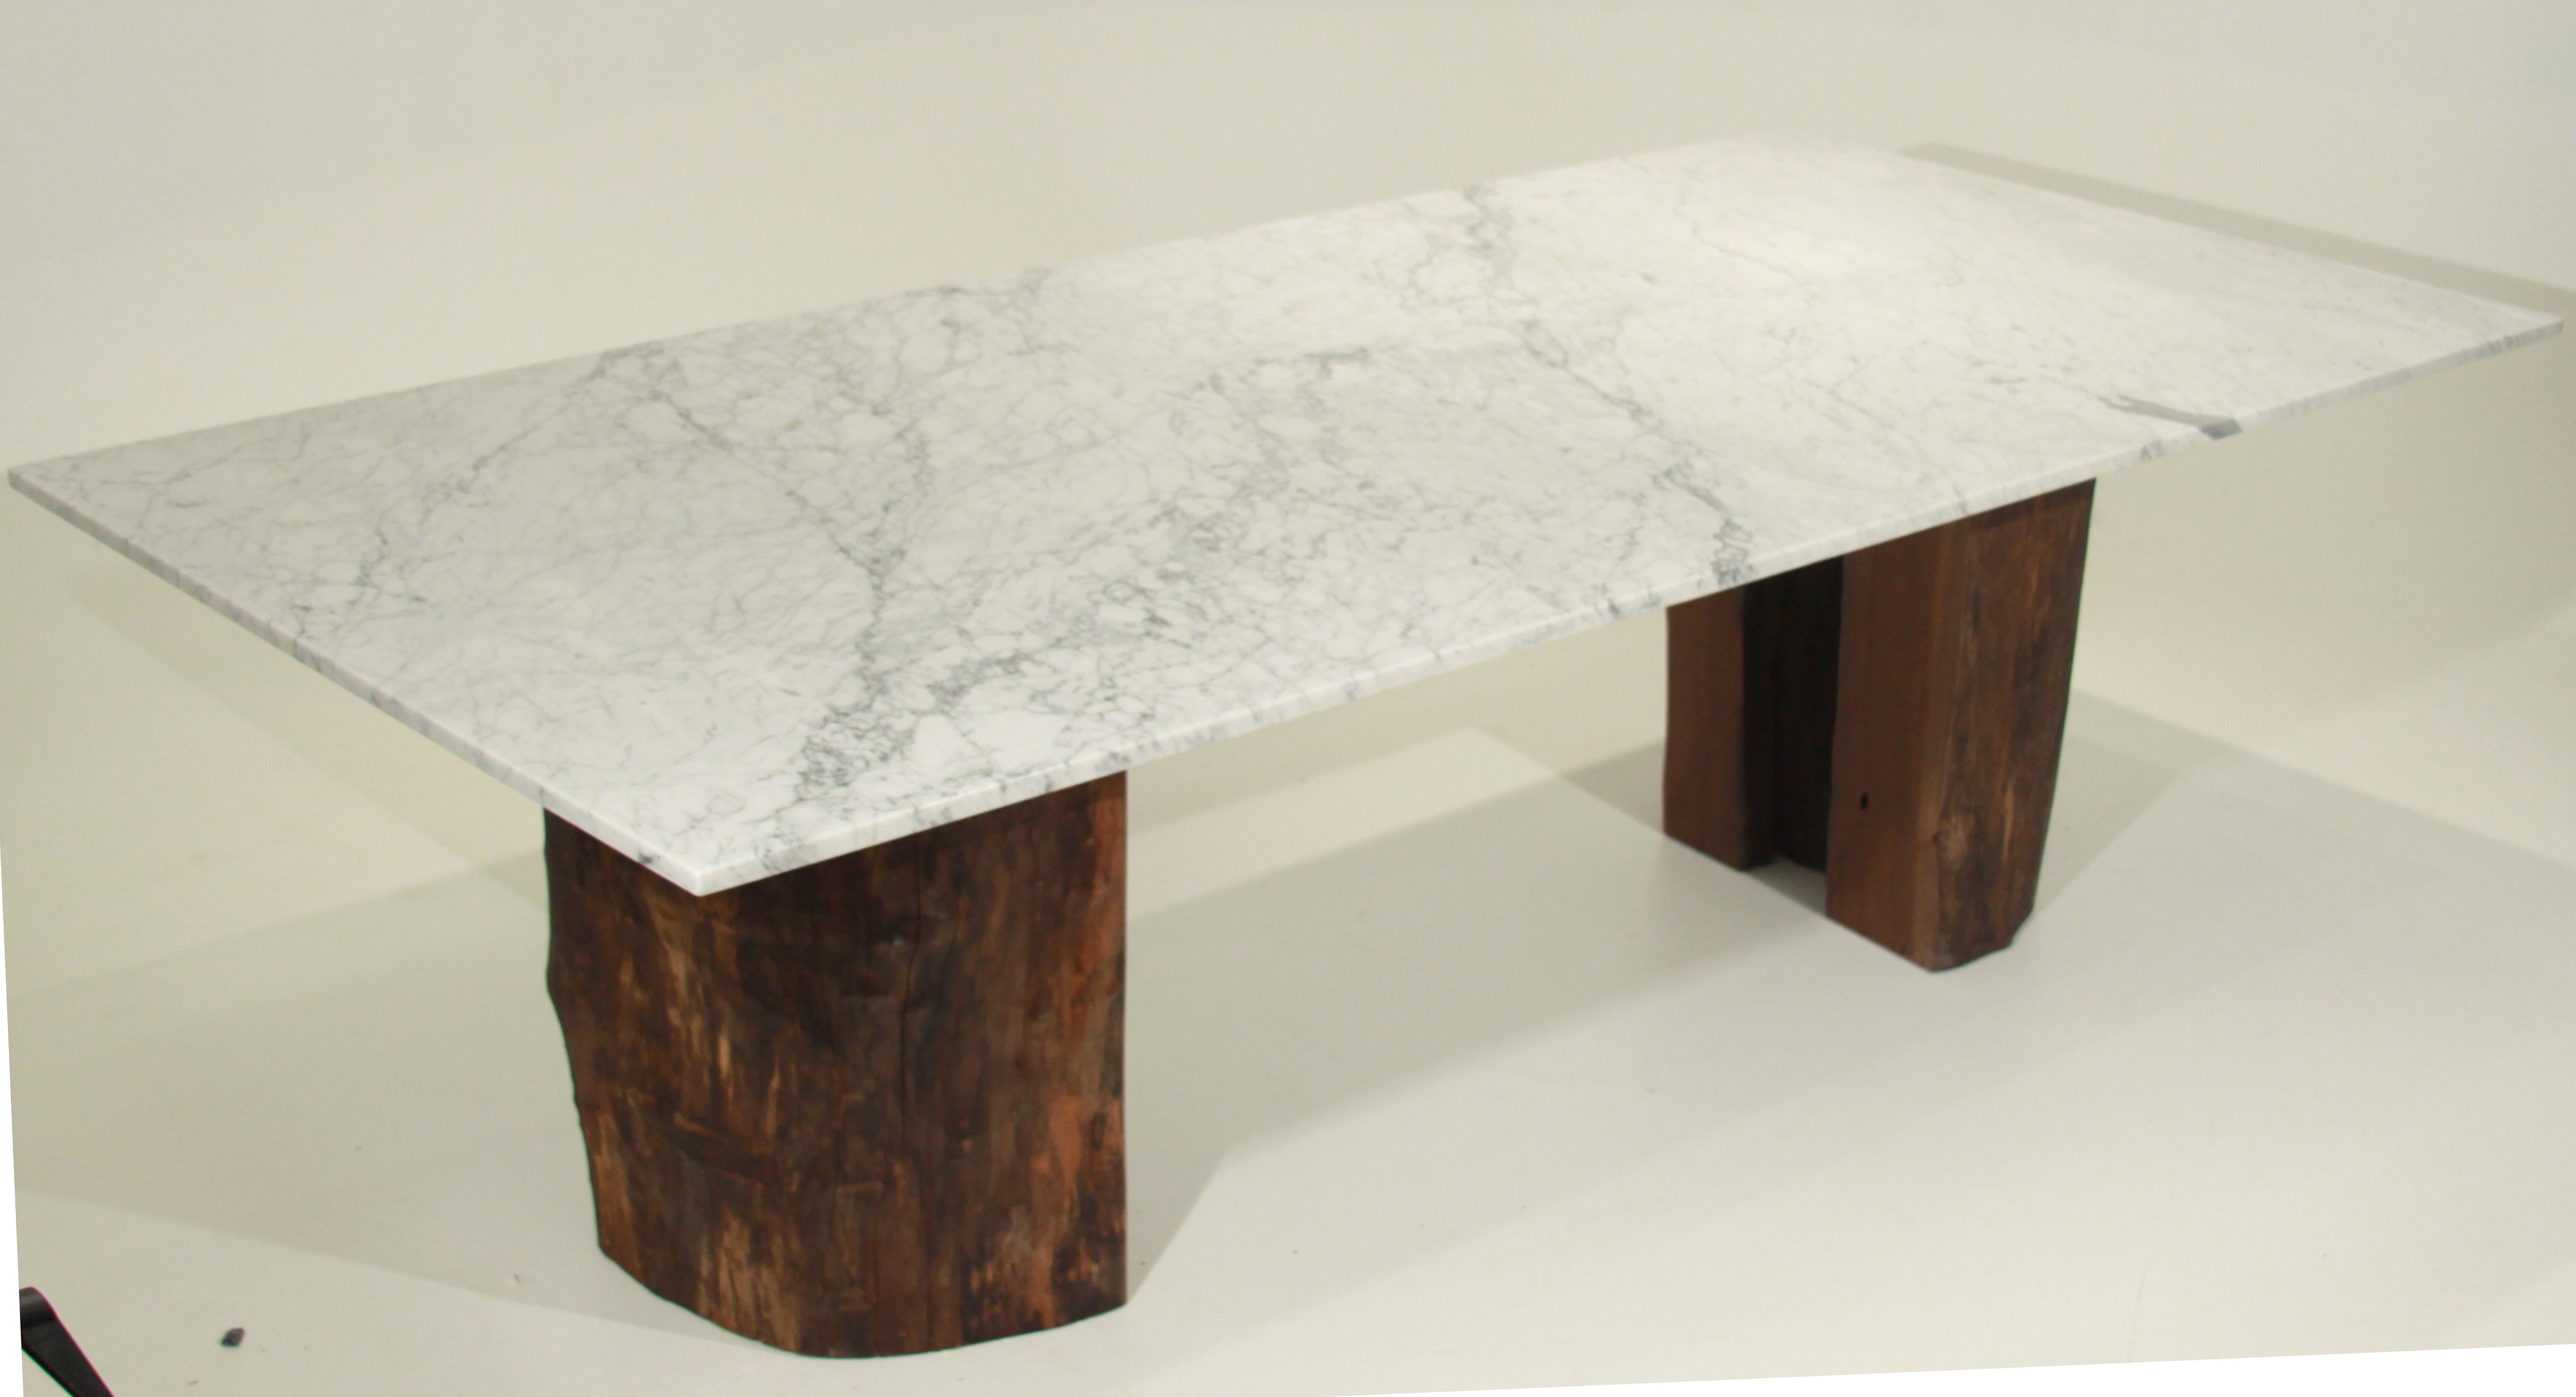 Ipe trunk pedestal dining table with marble top by Tunico T.